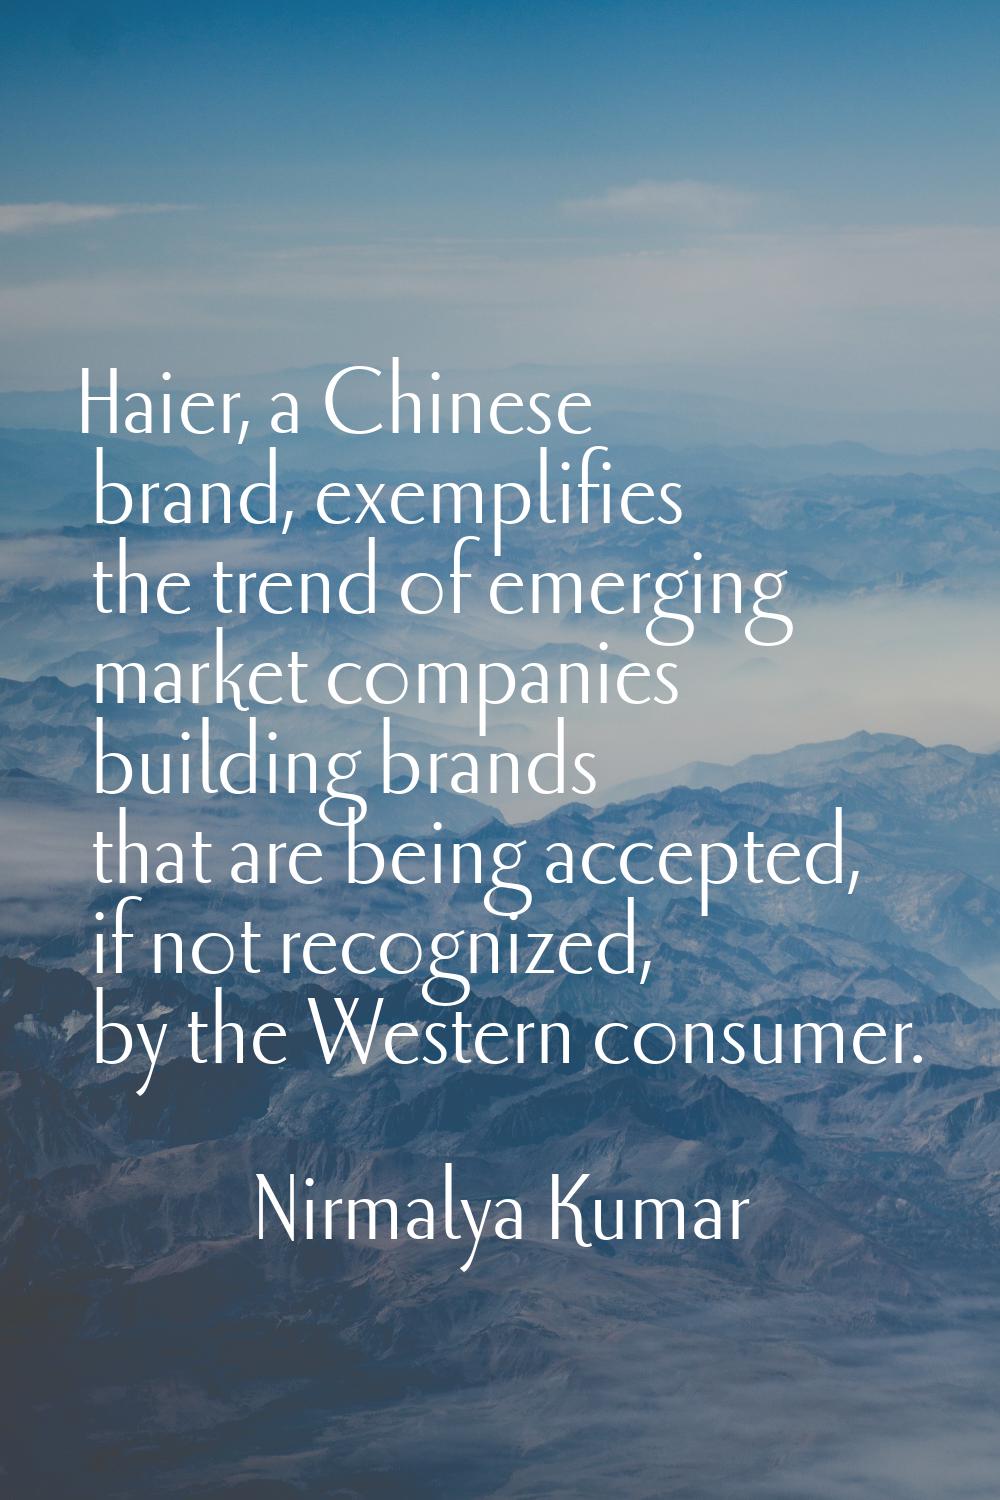 Haier, a Chinese brand, exemplifies the trend of emerging market companies building brands that are